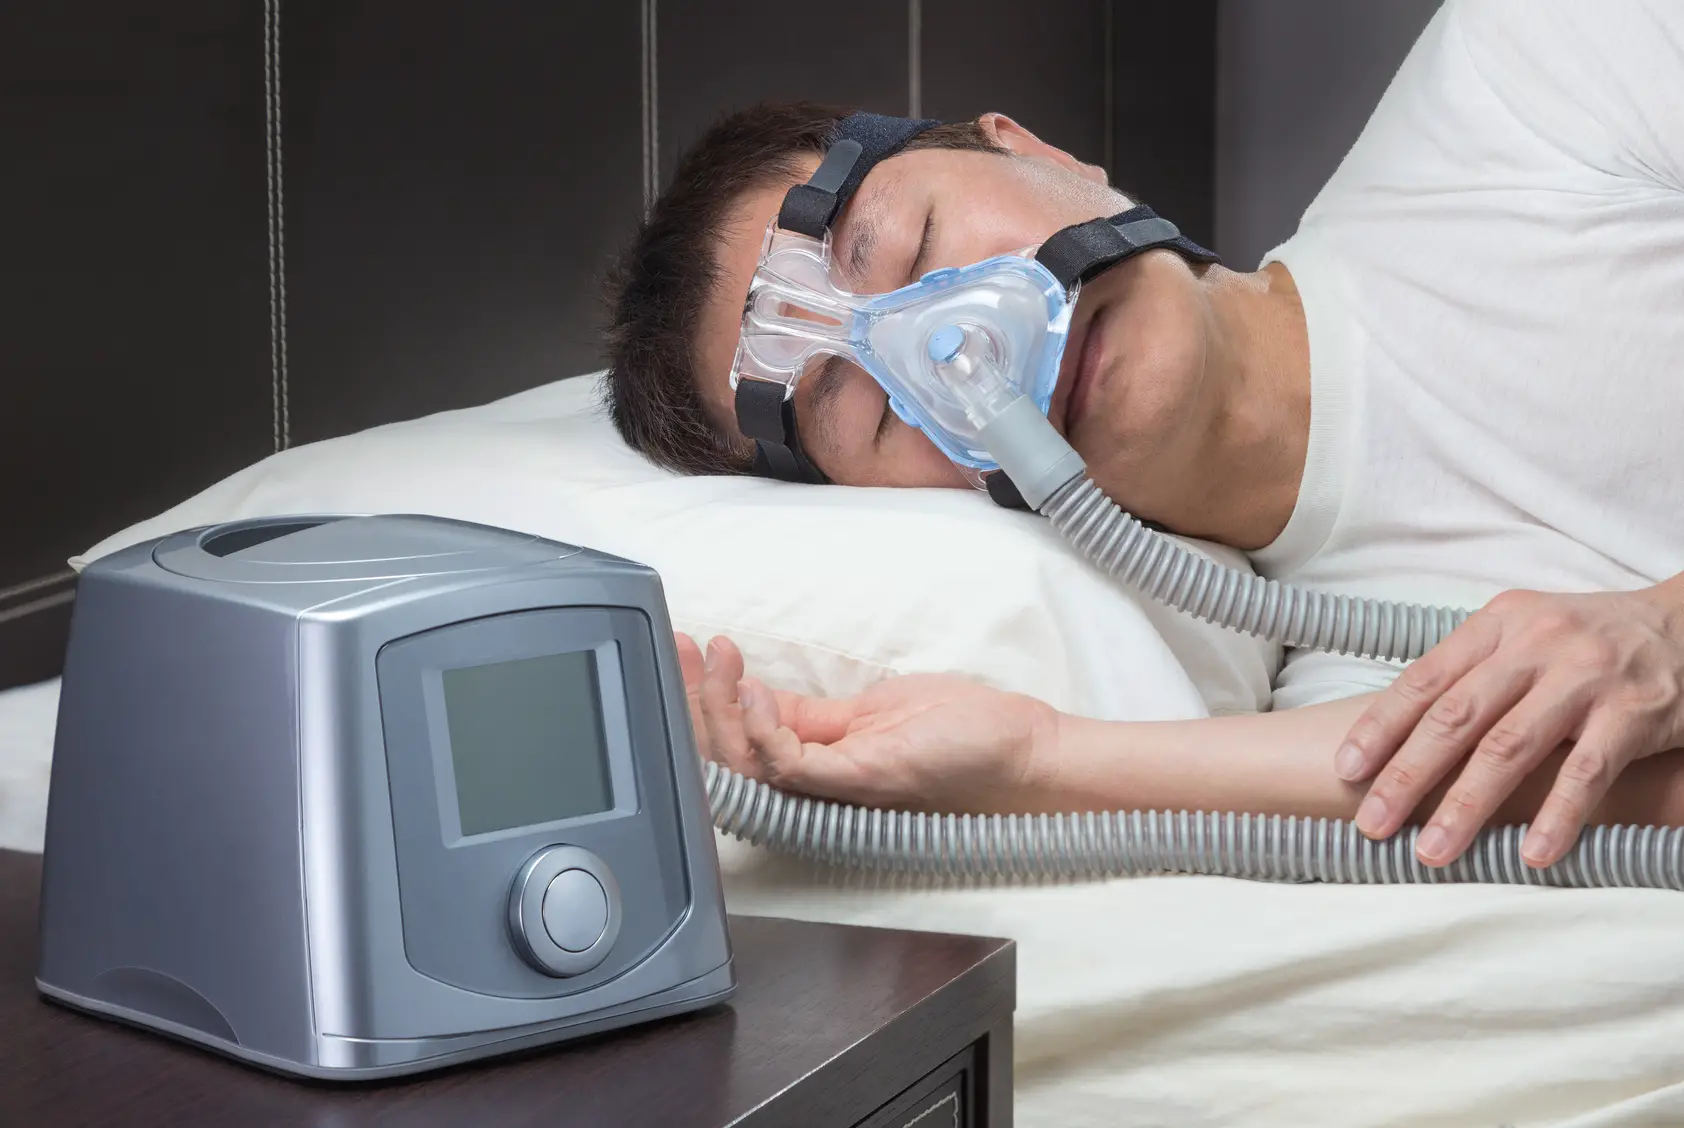 Sleep apnea machines have been linked to the deaths of over 500 people. 